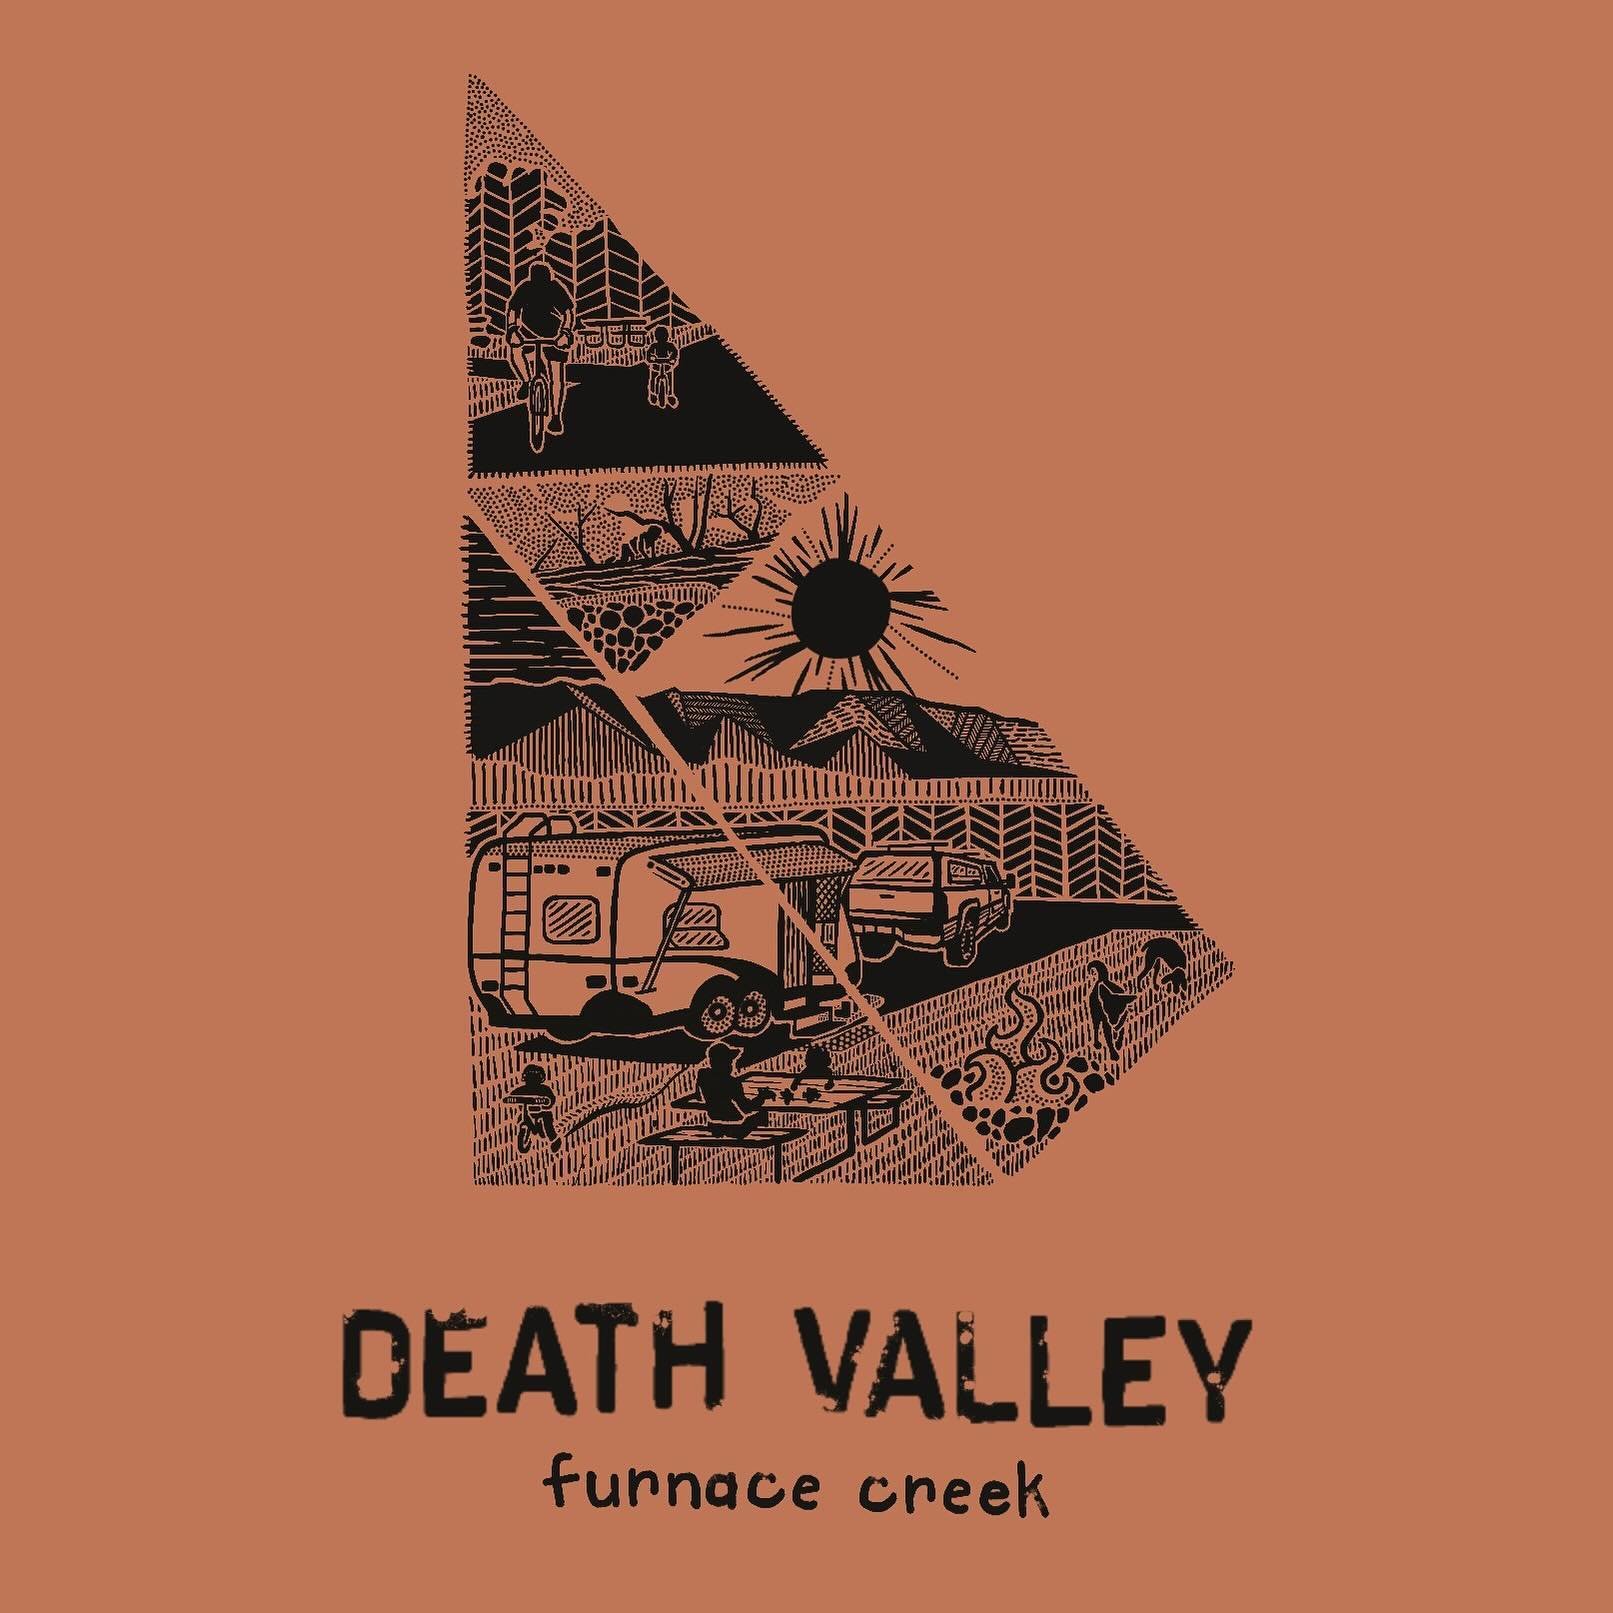 DEATH VALLEY
furnace creek

I am making a digital quilt of our roadtrip to honor Janie and this is my final patch before I reveal the &ldquo;quilt&rdquo;.

Furnace Creek is a beautiful area with a lot of amenities. There is a beautiful resort, a nati